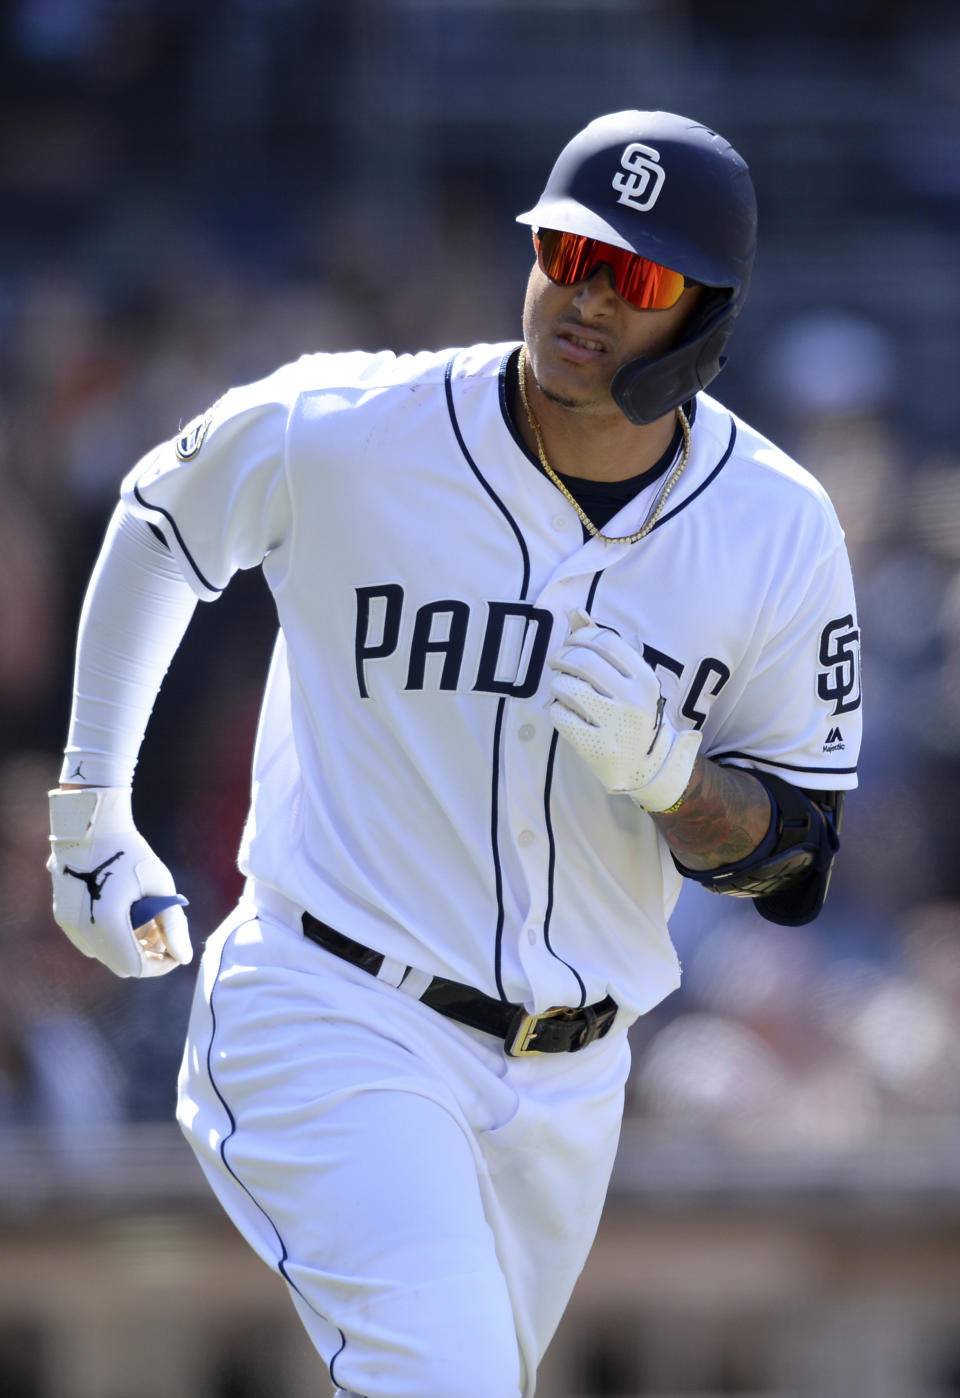 San Diego Padres' Manny Machado looks over to the dugout as he rounds the bases after hitting a two-run home run during the seventh inning of a baseball game against the Arizona Diamondbacks Wednesday, April 3, 2019, in San Diego. (AP Photo/Orlando Ramirez)